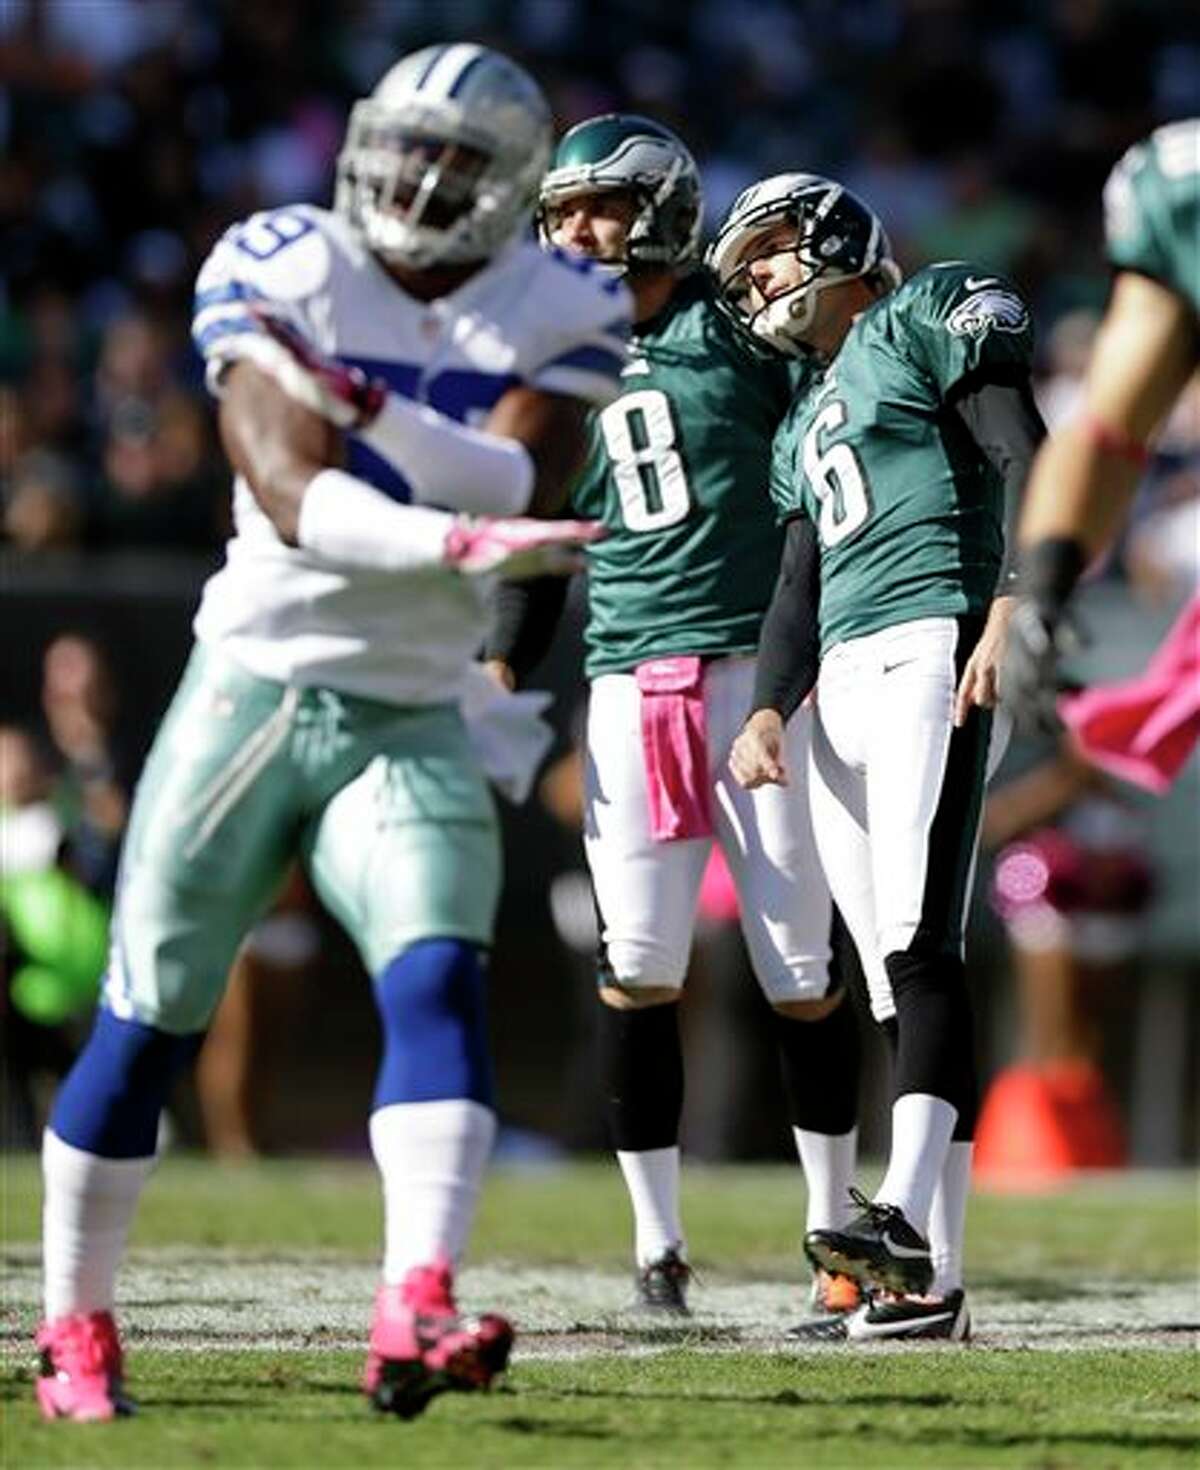 Philadelphia Eagles kicker Alex Henery (6) and placeholder Donnie Jones (8) watch Henery's missed field goal attempt as Dallas Cowboys' Ernie Sims, left, gestures against it during the first half of an NFL football game, Sunday, Oct. 20, 2013, in Philadelphia.